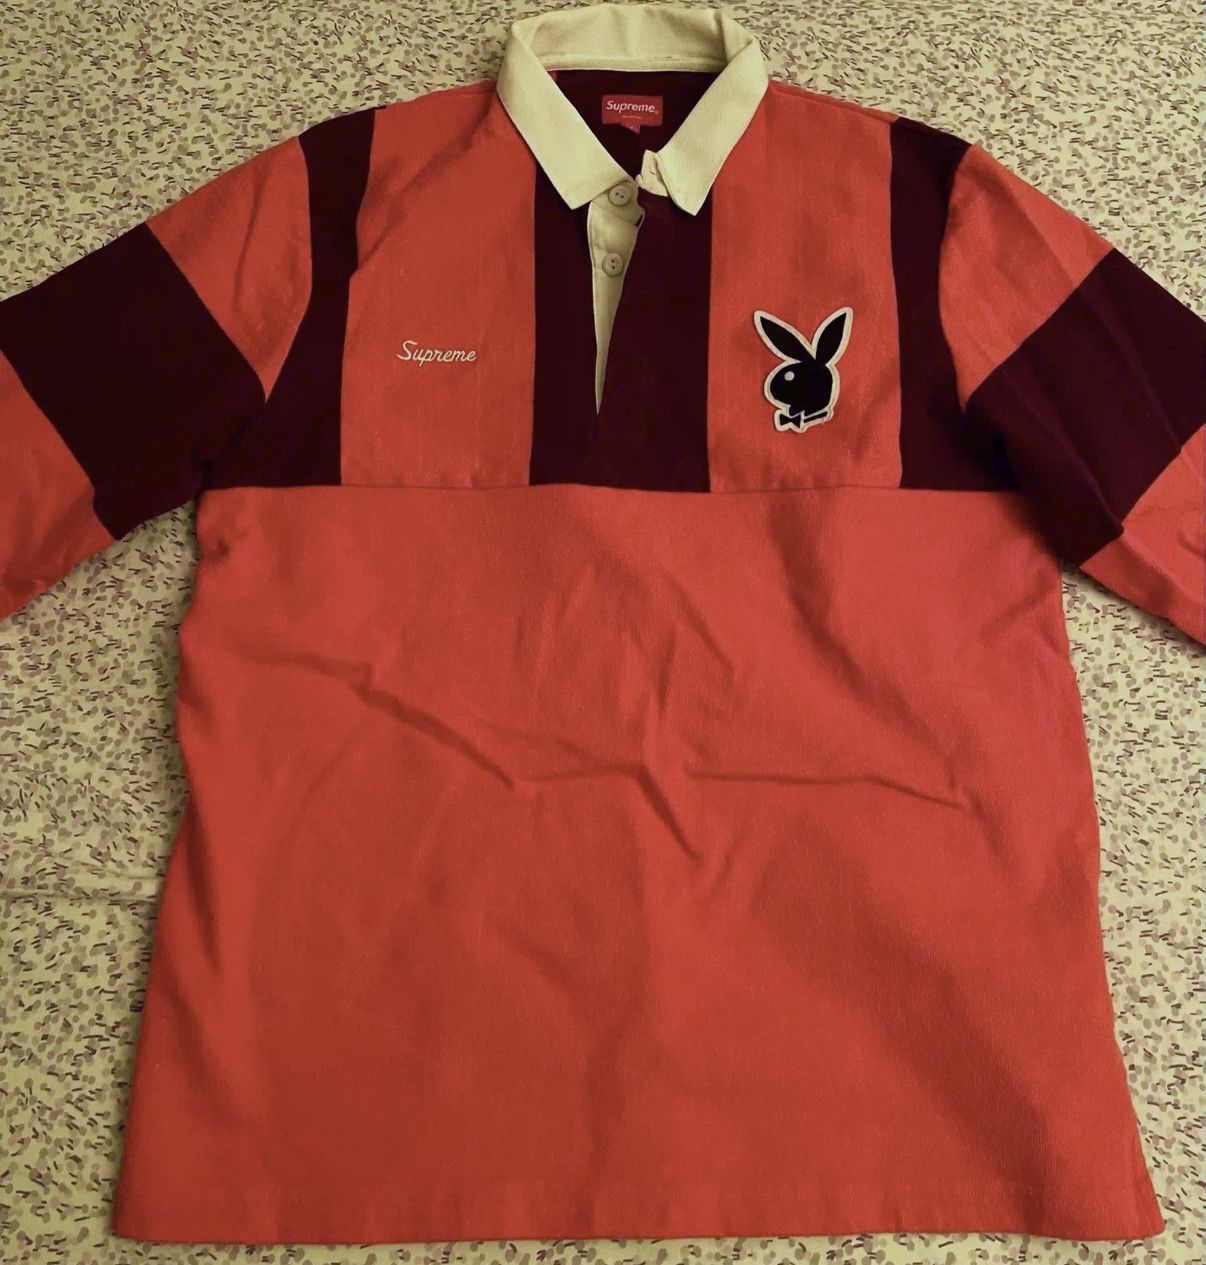 Playboy Supreme Rugby | Grailed